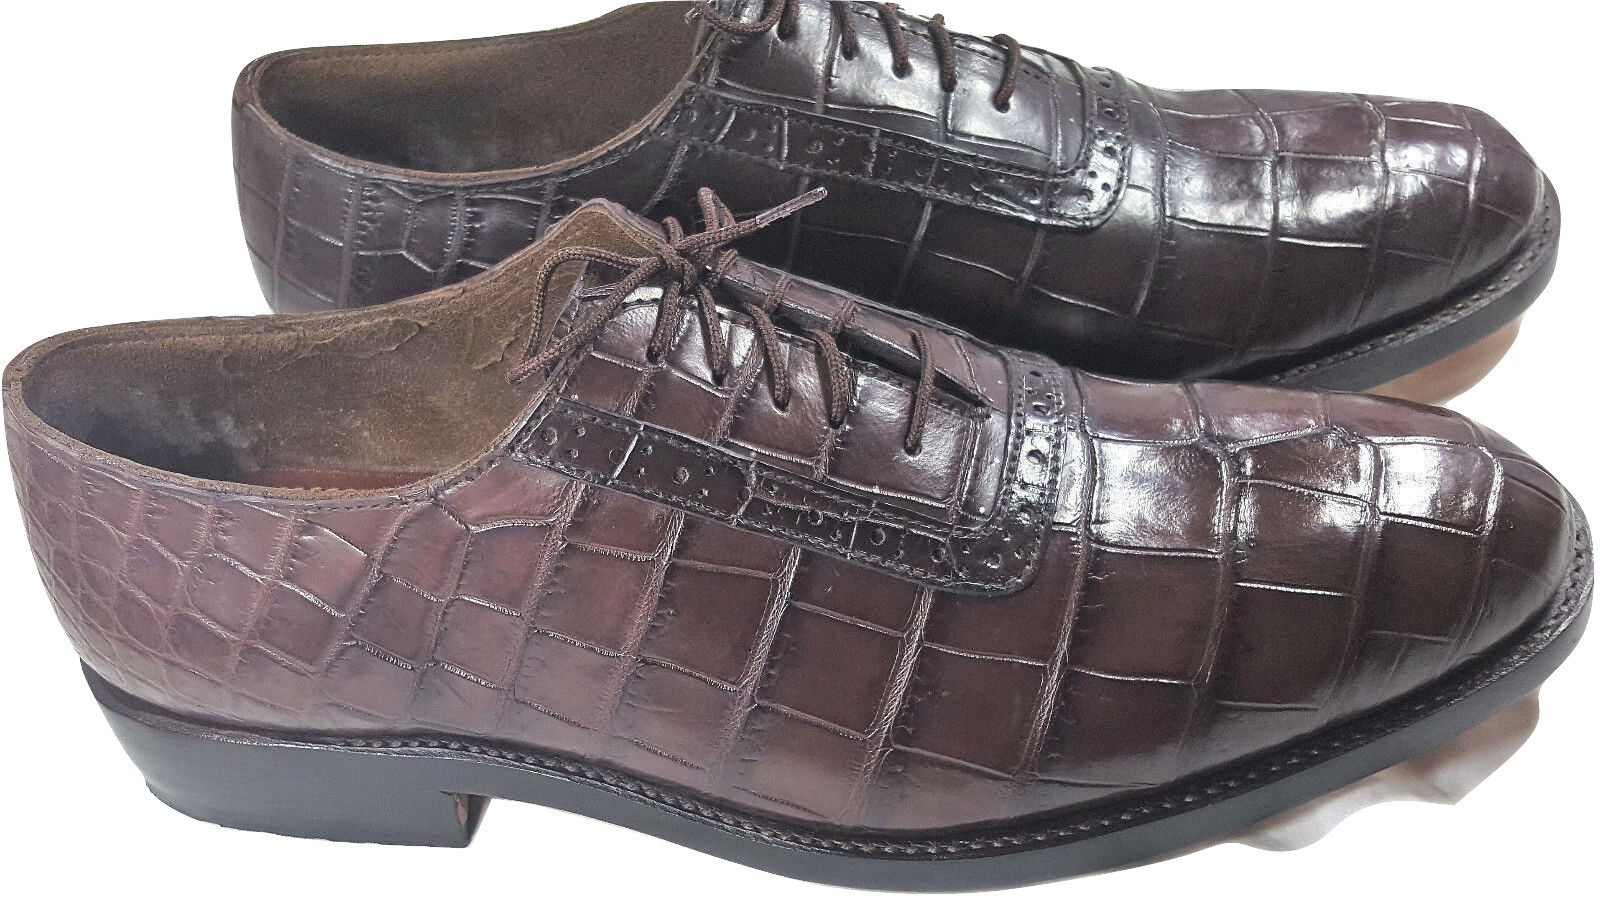 Men Oxford Shoes Brown Belly Crocodile Leather Single Piece Upper Size ...